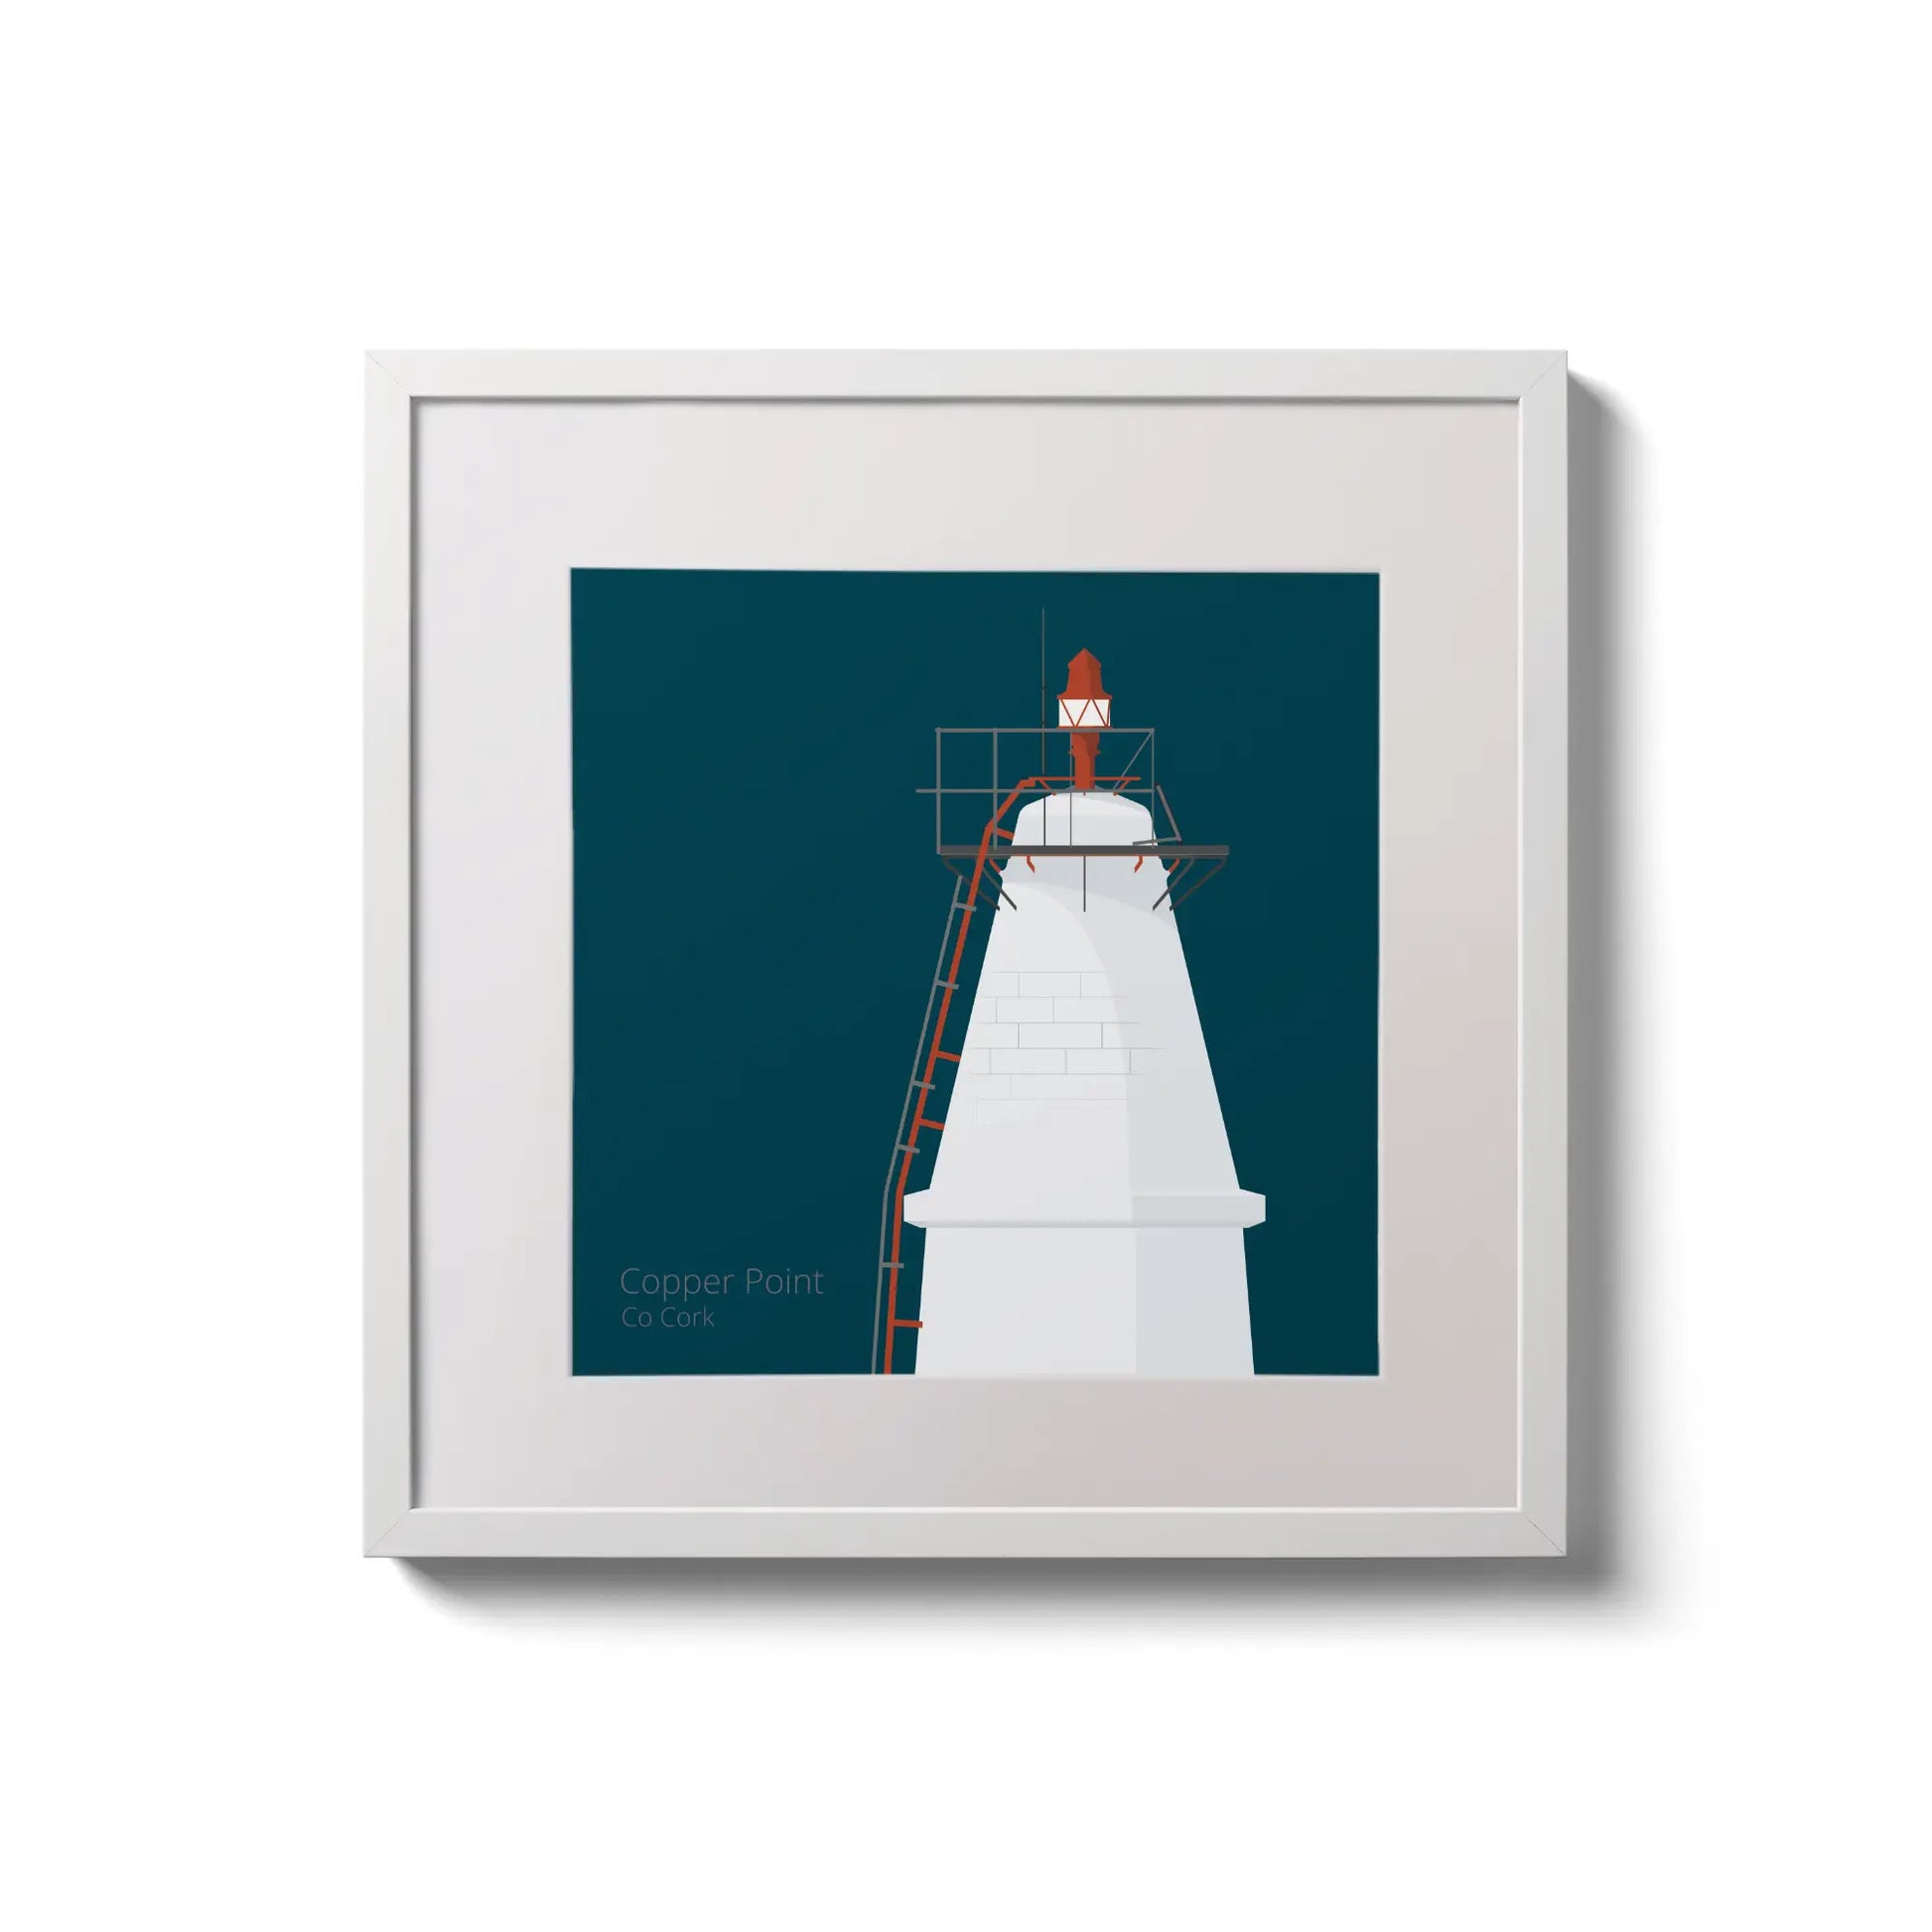 Framed wall art decoration Copper Point lighthouse on a midnight blue background,  in a white square frame measuring 20x20cm.